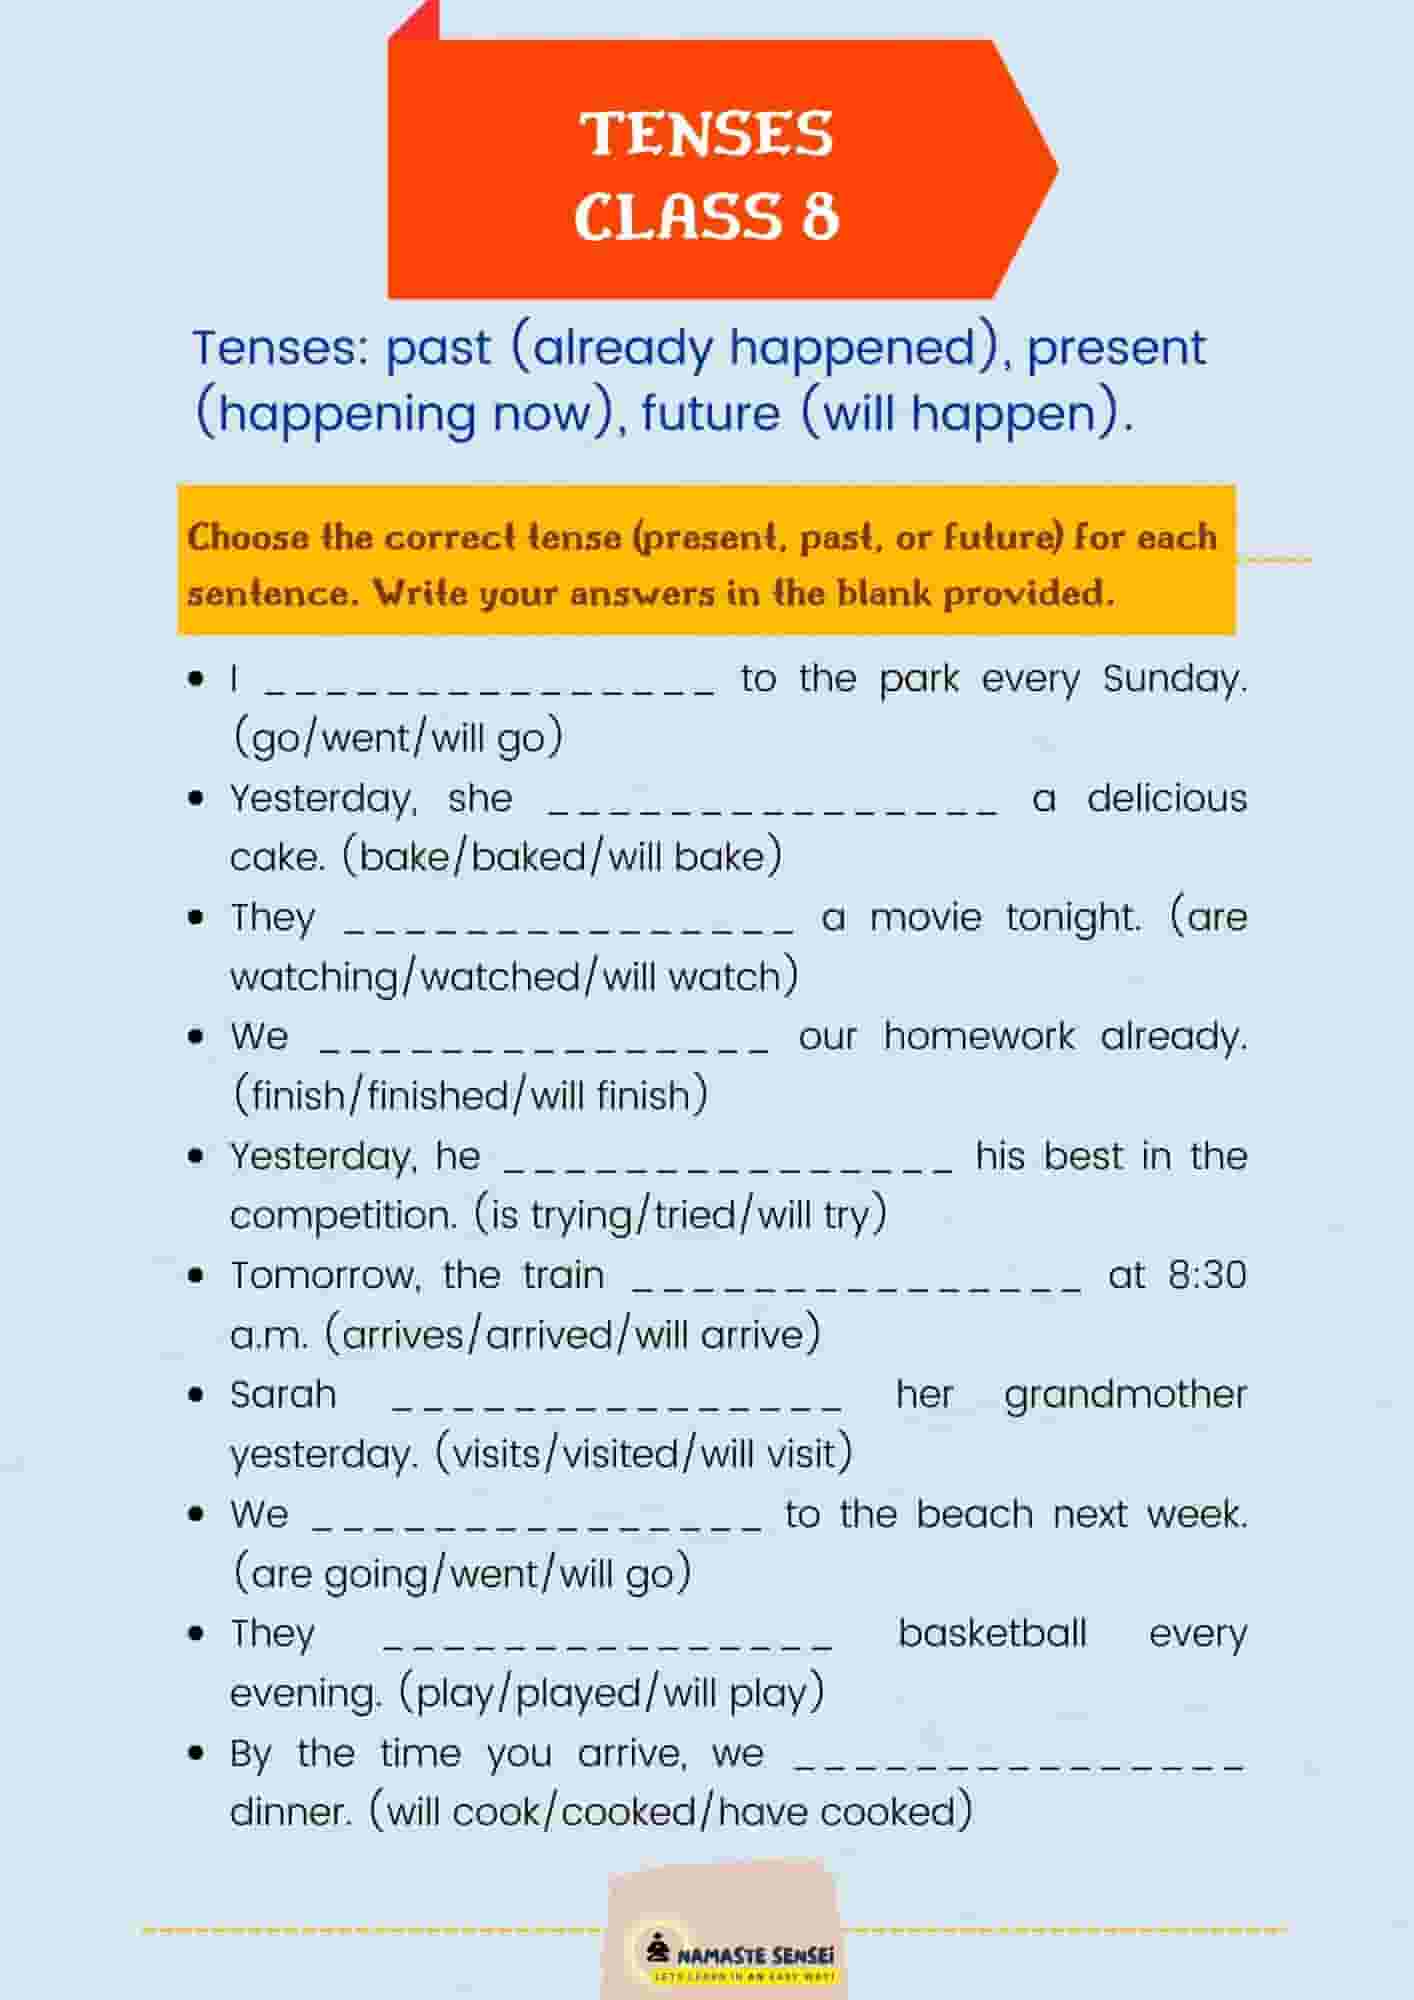 tenses-worksheet-for-class-8-with-answers-free-pdf